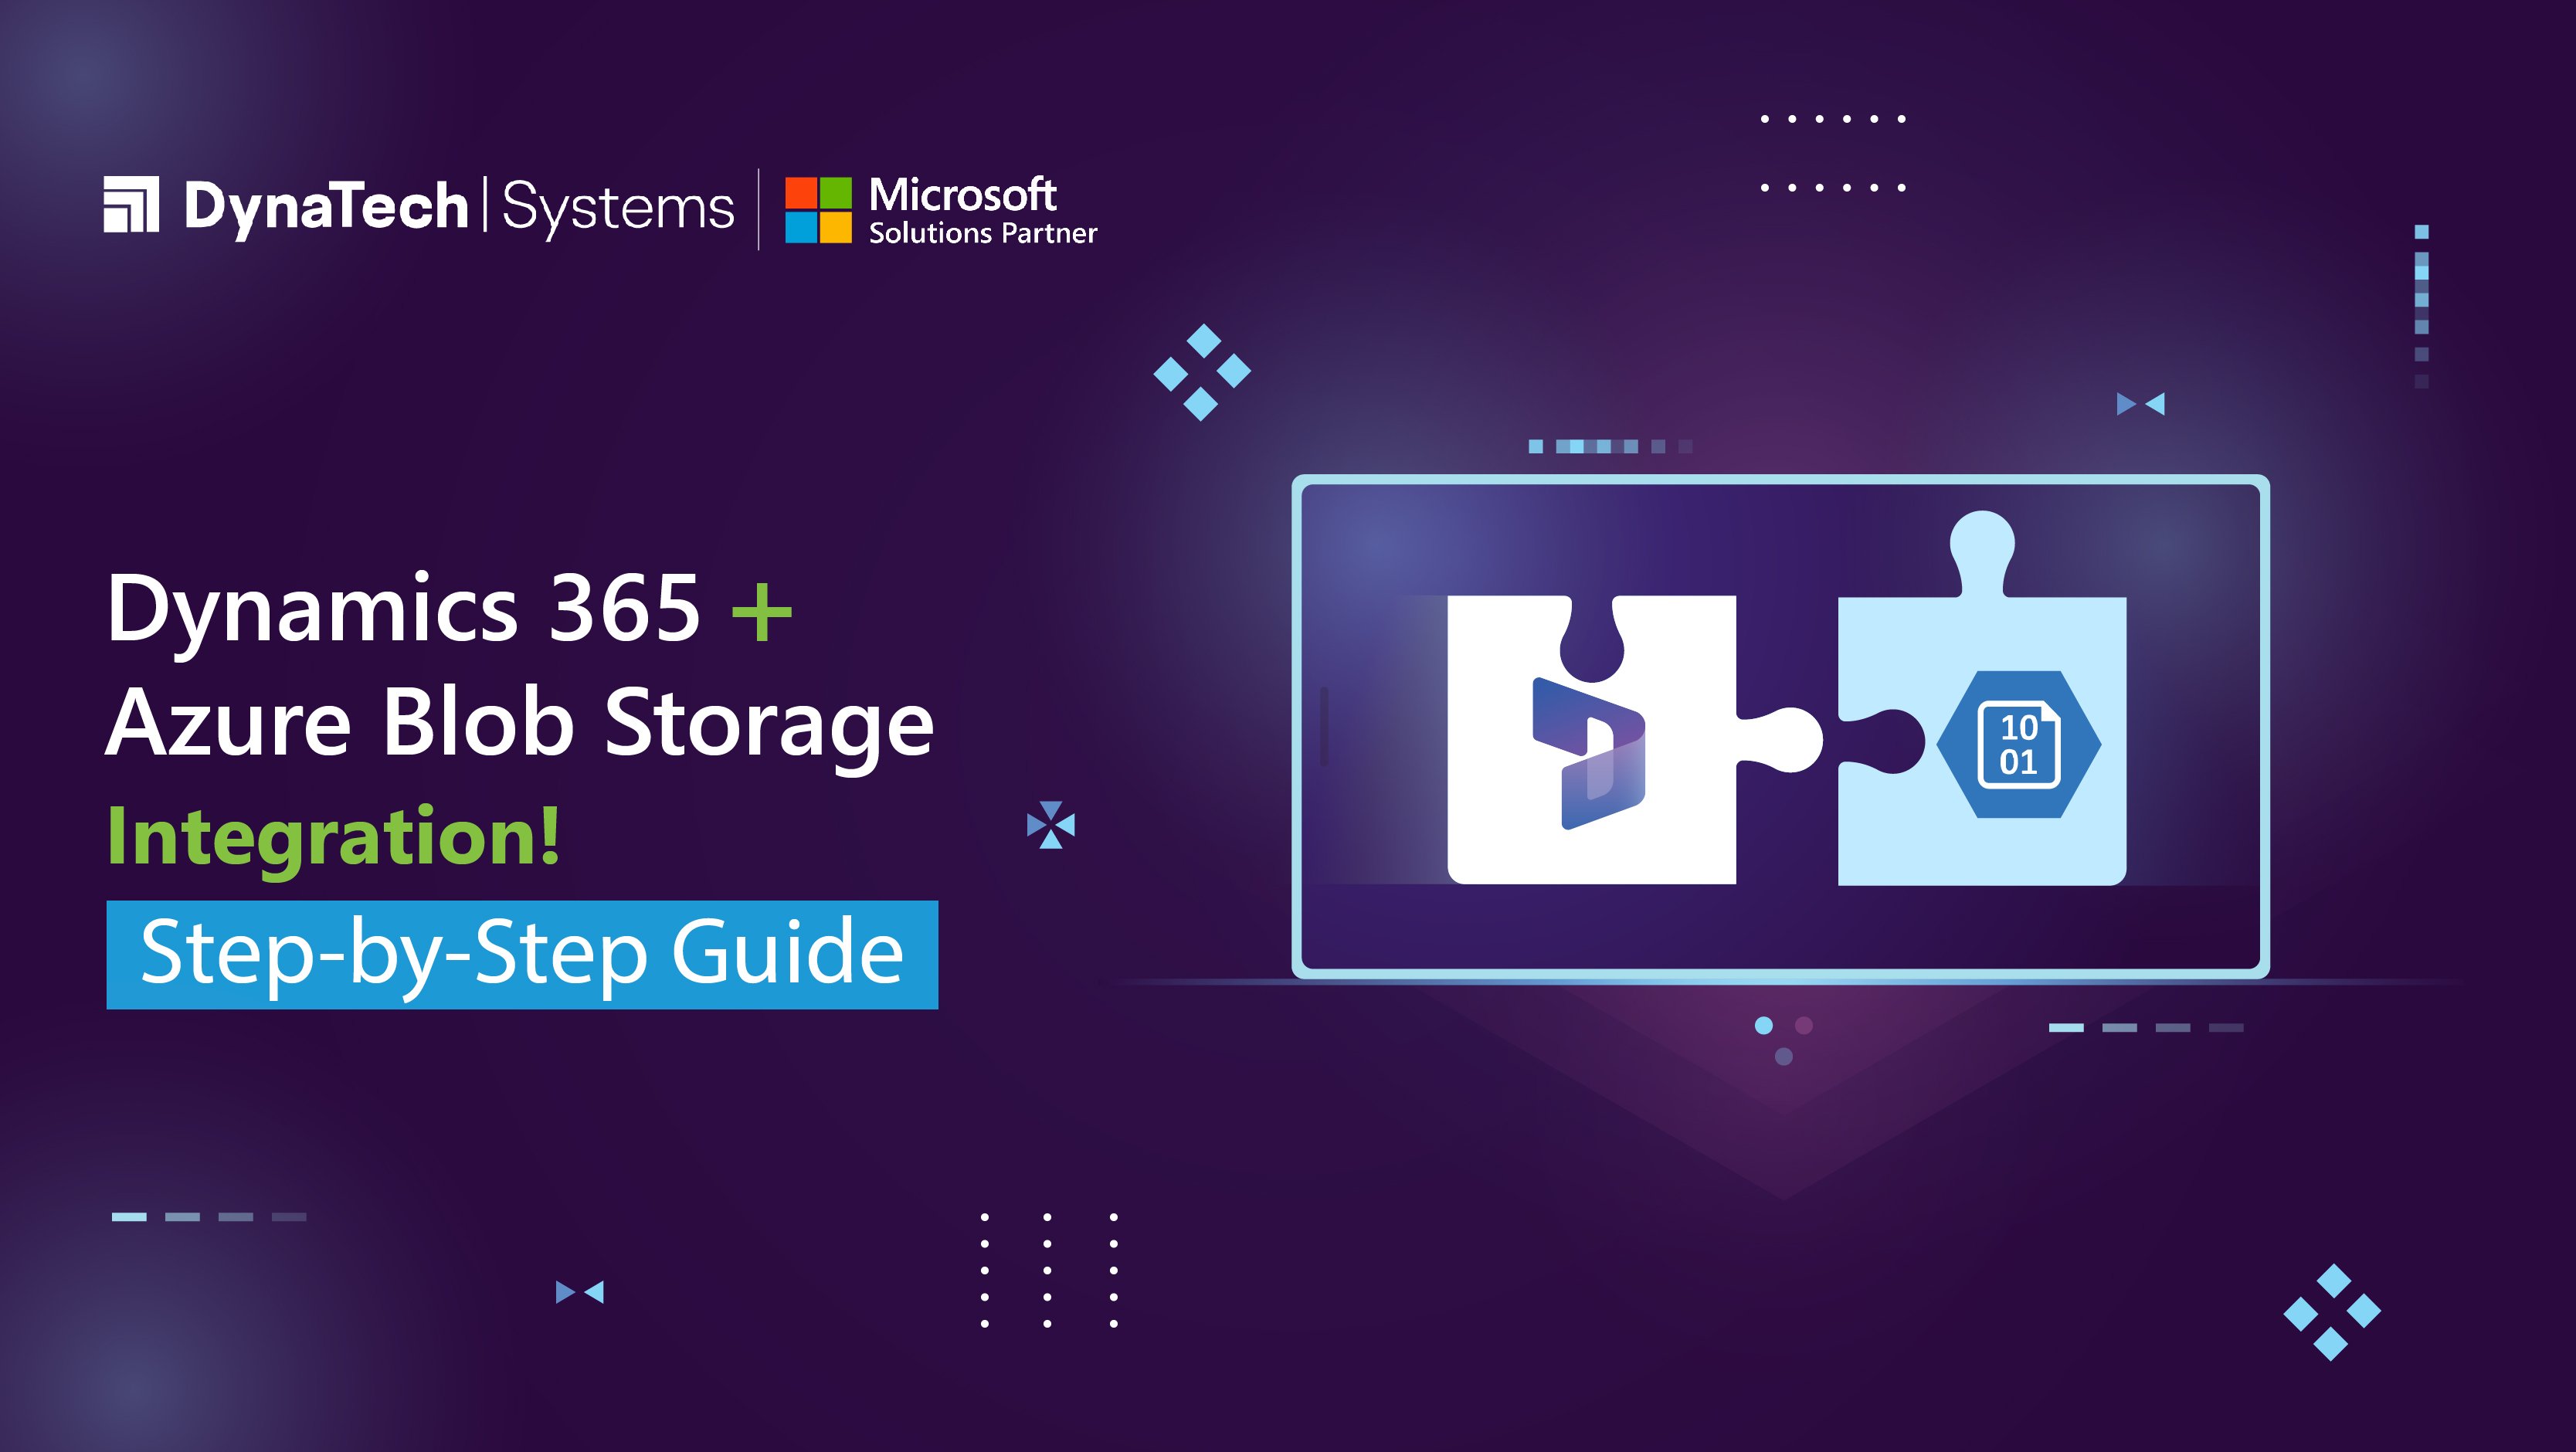 Step-by-Step Guide: Integrating Dynamics 365 with Azure Blob Storage using DynaTech’s Custom Tool